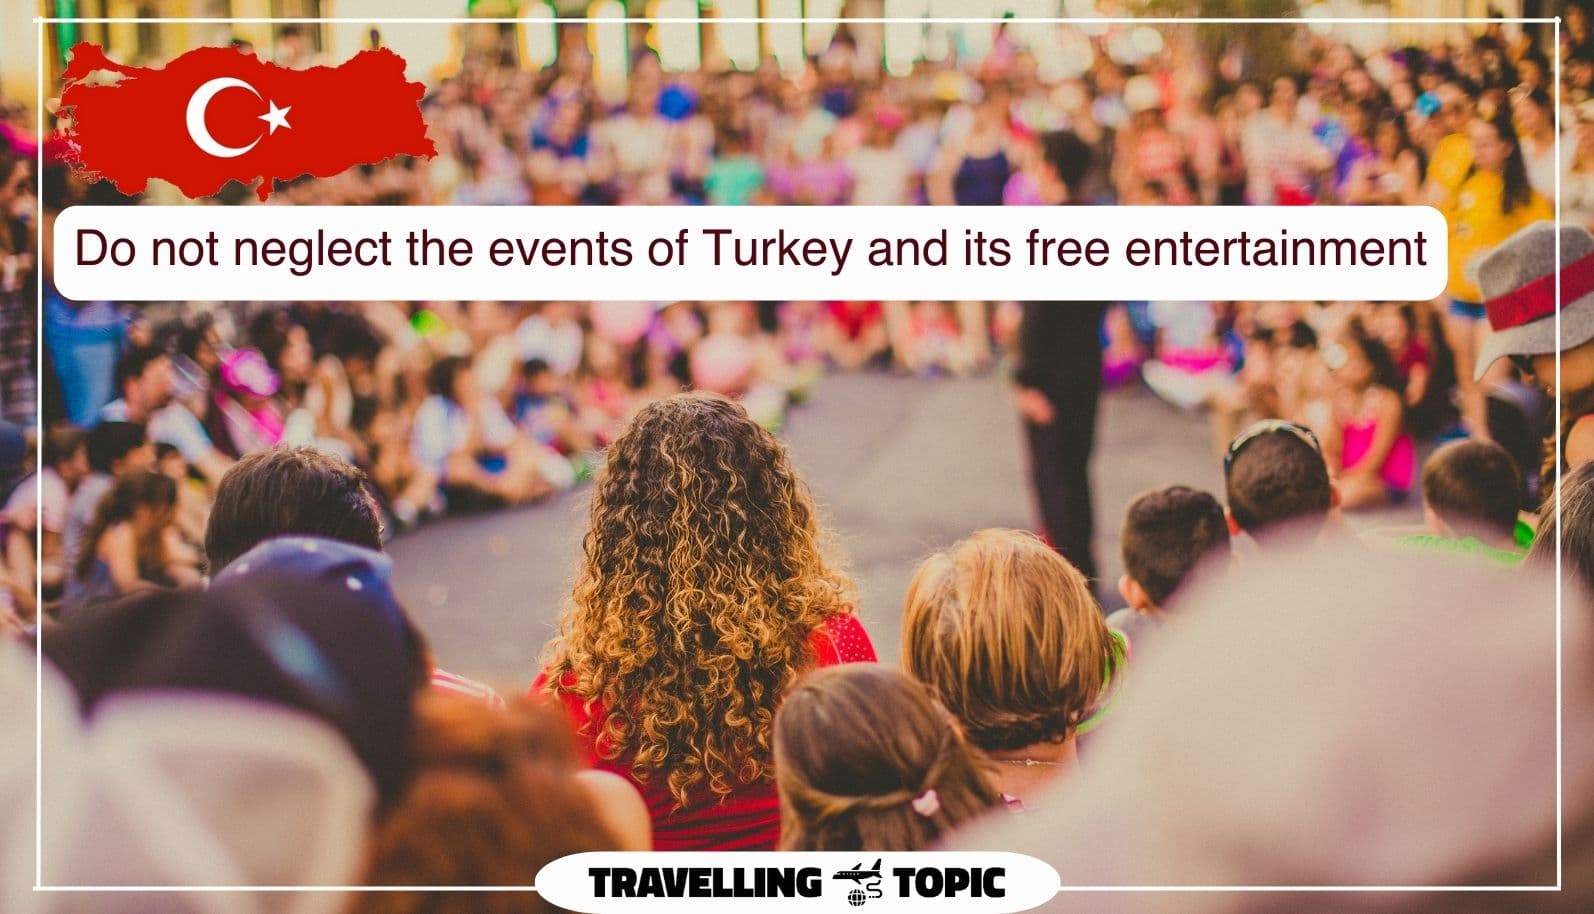 Do not neglect the events of Turkey and its free entertainment